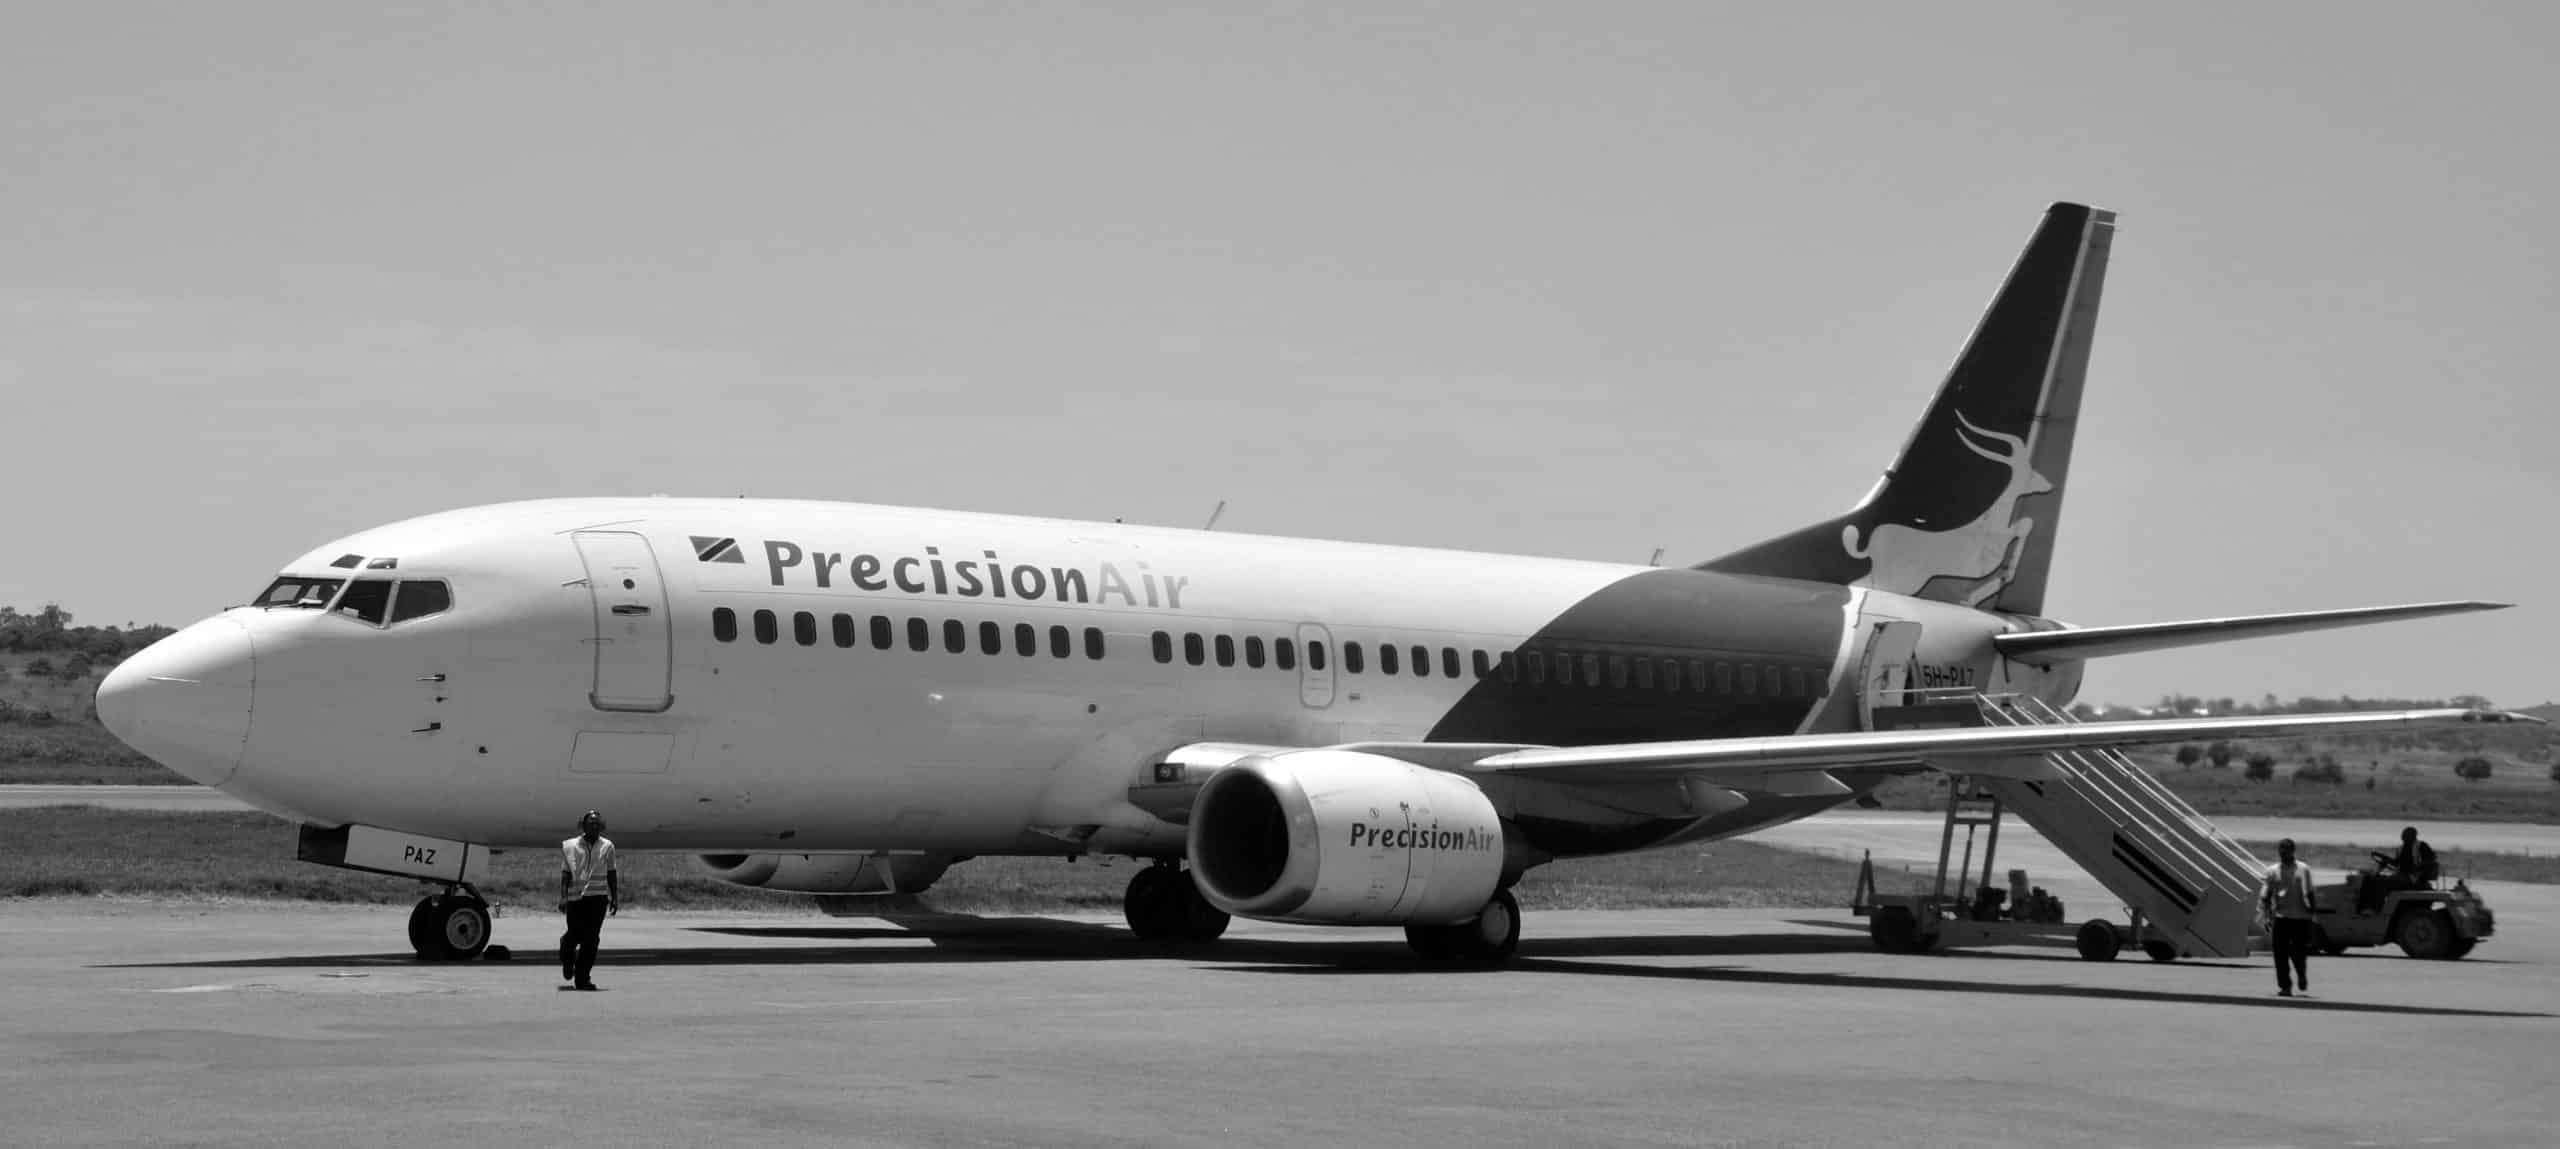 Boeing 737-300 owned by Precision Air, parking at Mwanza Airport